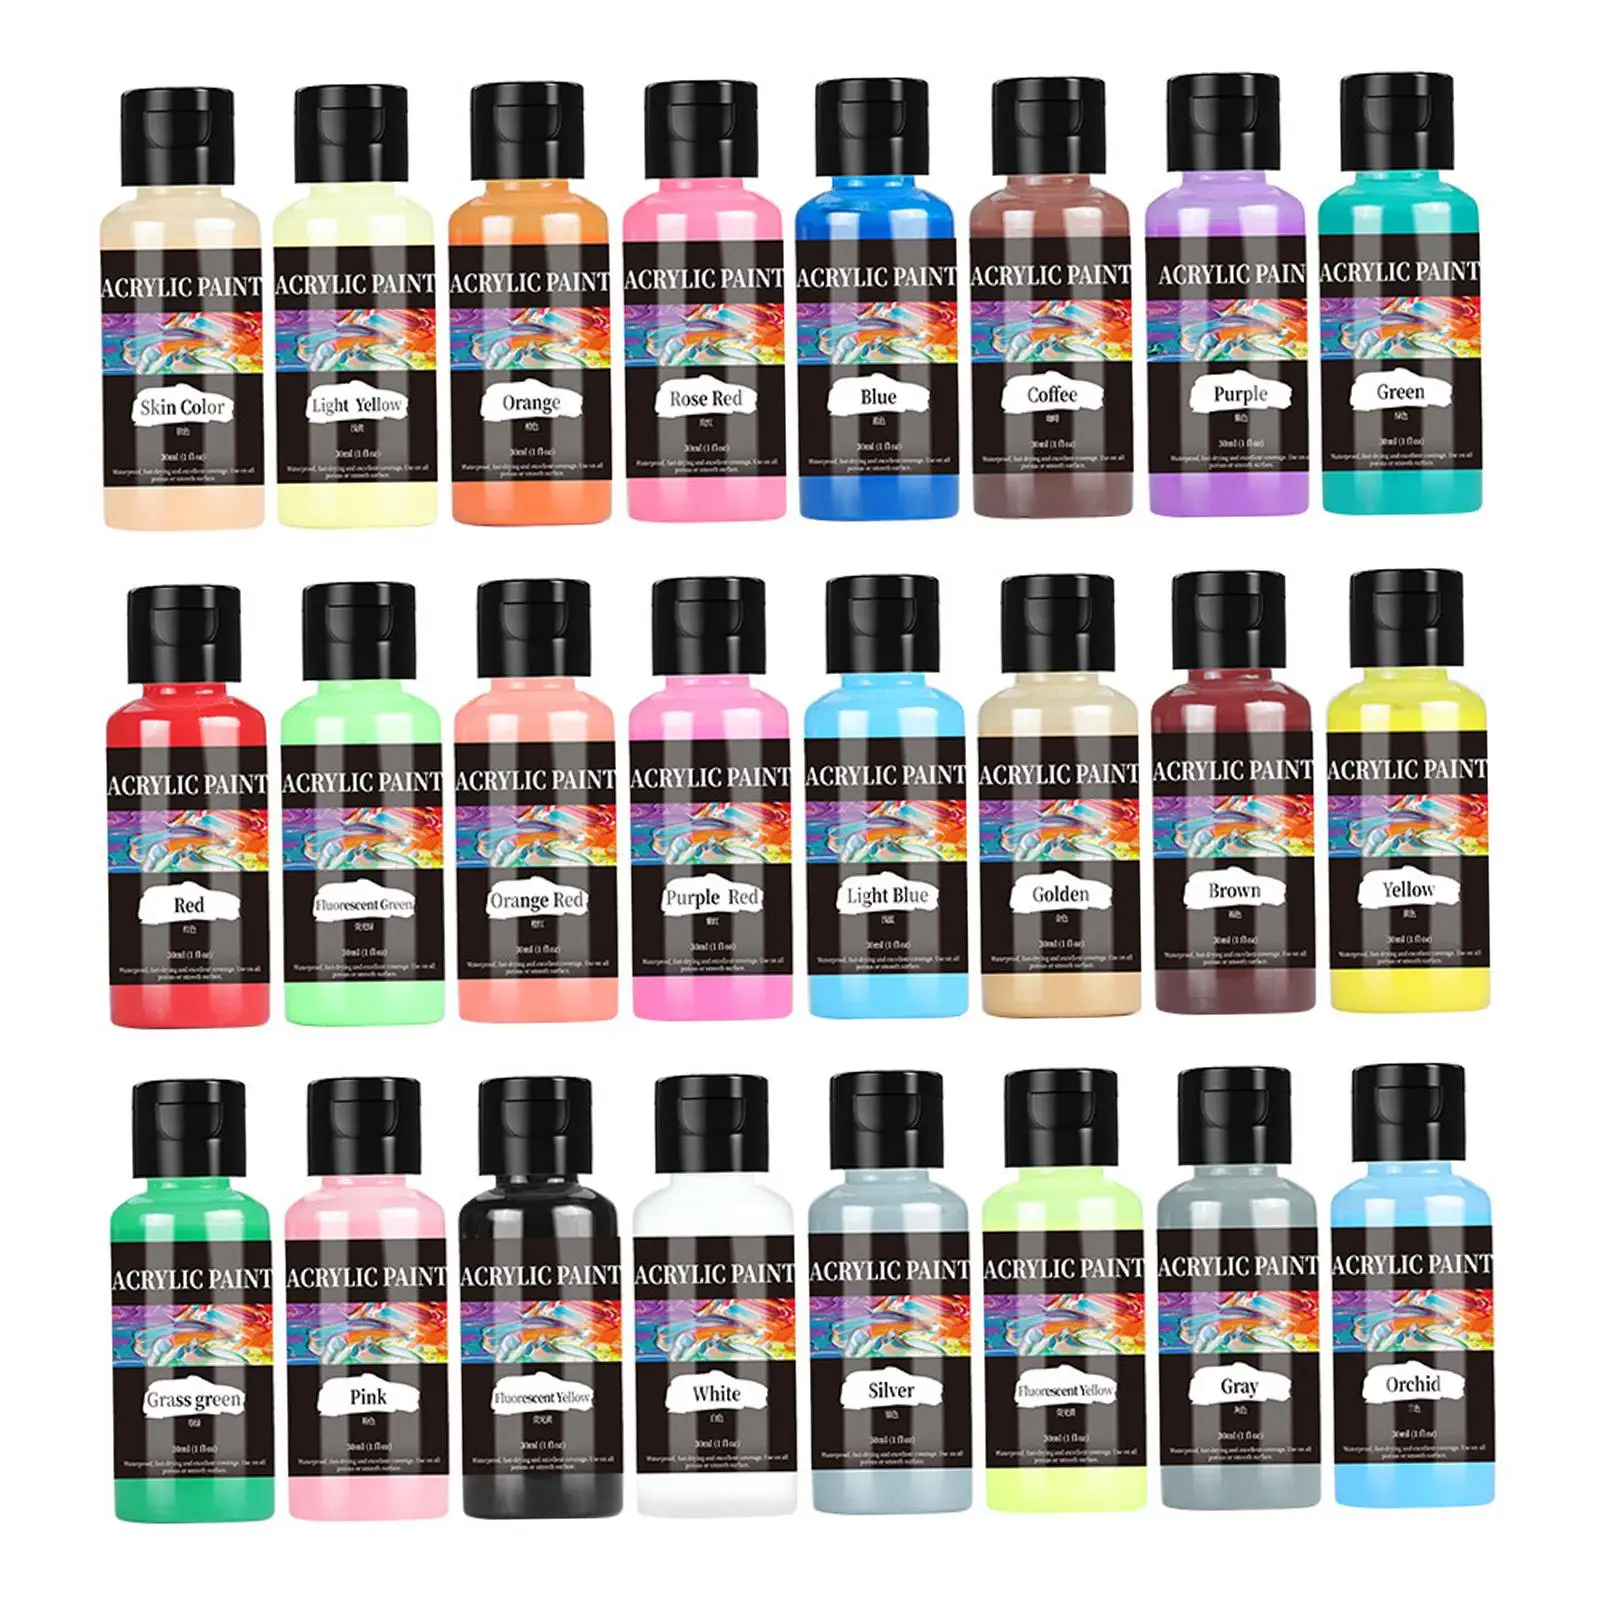 24x Acrylic Leather Paint Set Water based Paint Waterproof Artists 30ml Acrylic Paint Set for Car Seat Shoes Paper Bags Canvas